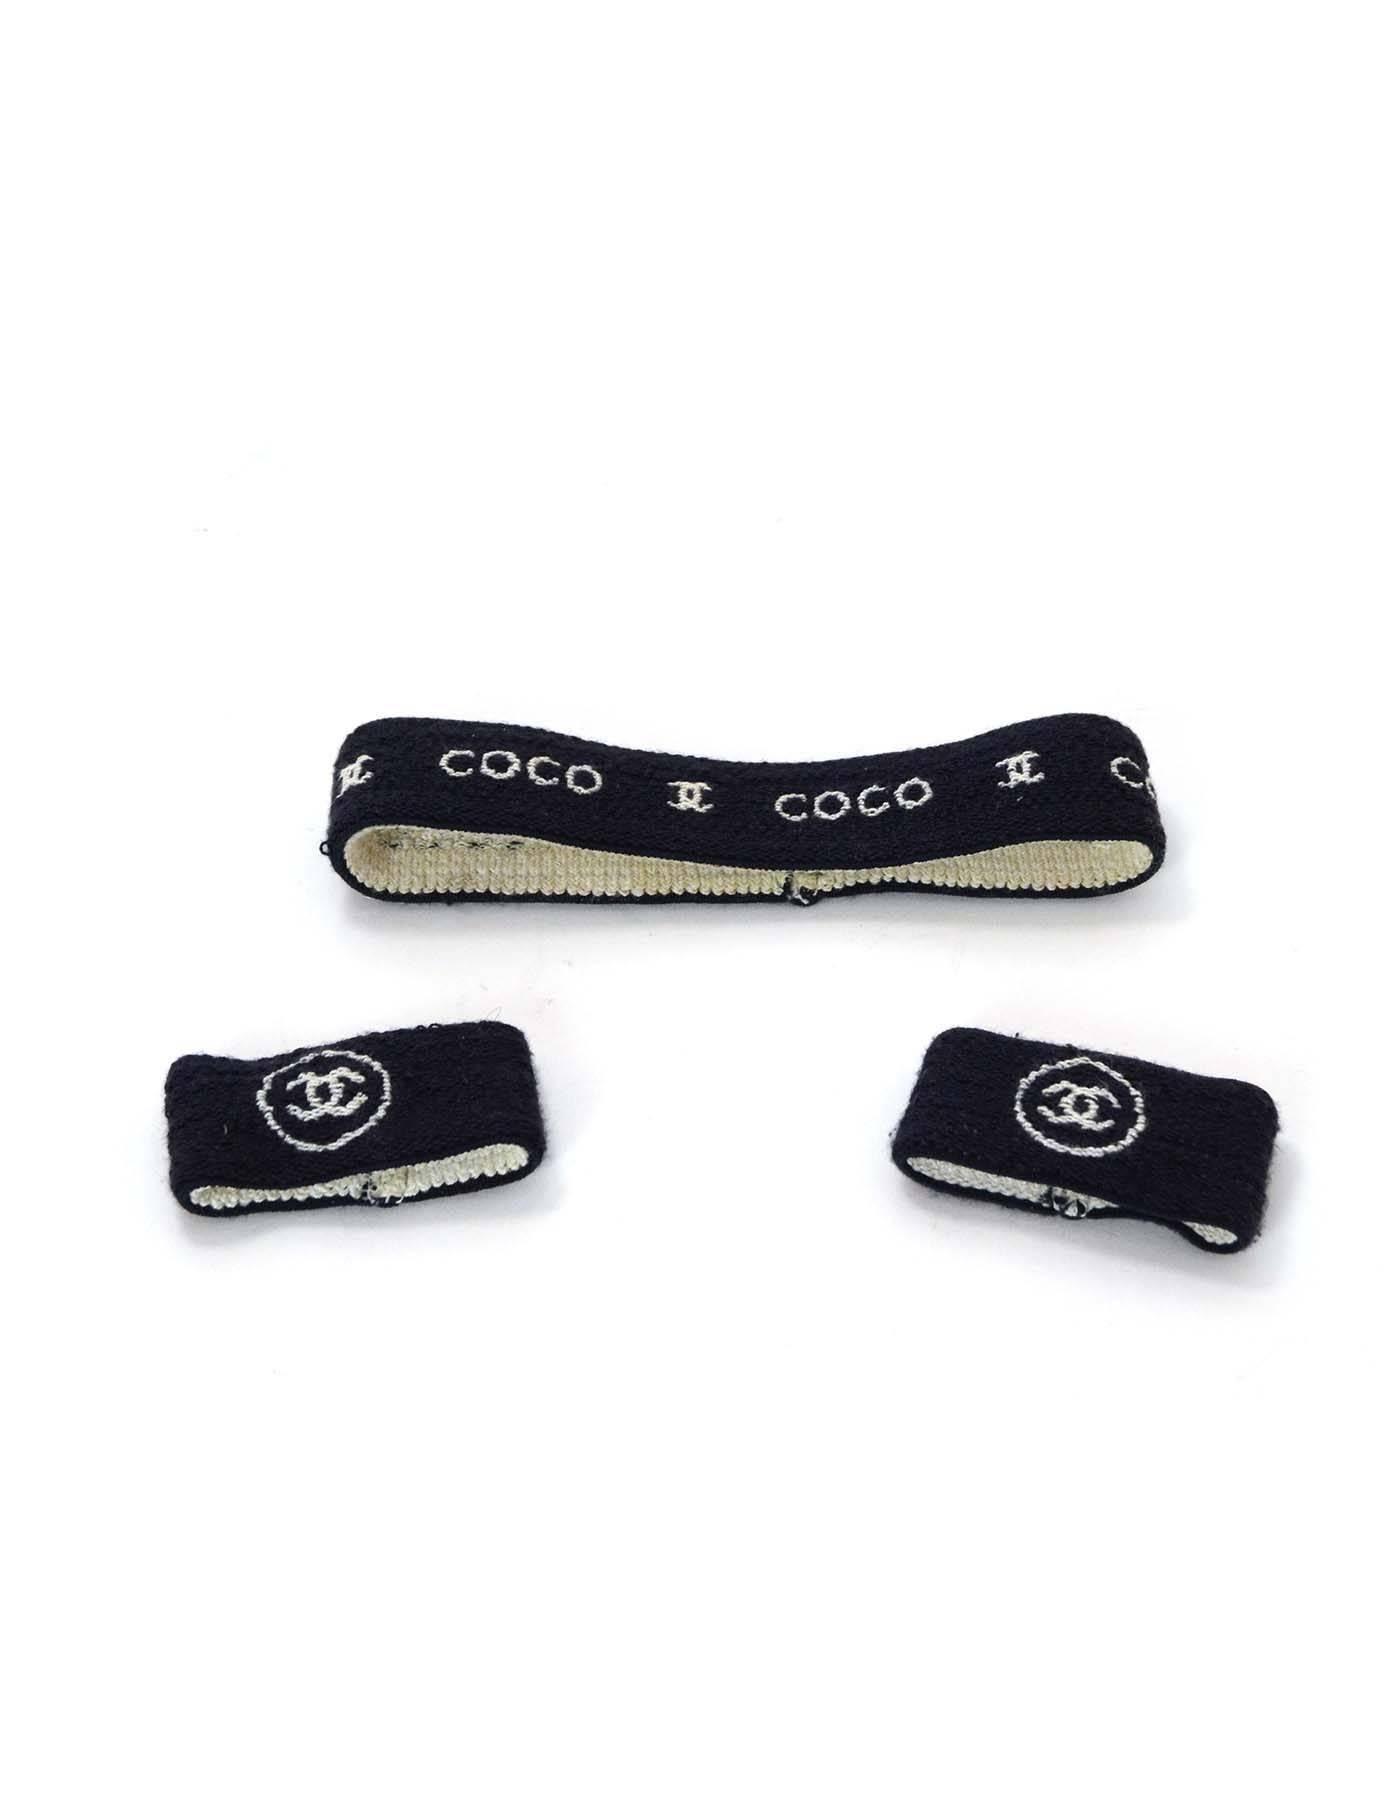 Chanel Navy and White Sweatband Set

Features CC logo throughout

Color: Navy and white
Composition: Not listed, believed to be cotton blend
Overall Condition: Very good pre-owned condition with the exception of gentle wear throughout, slight